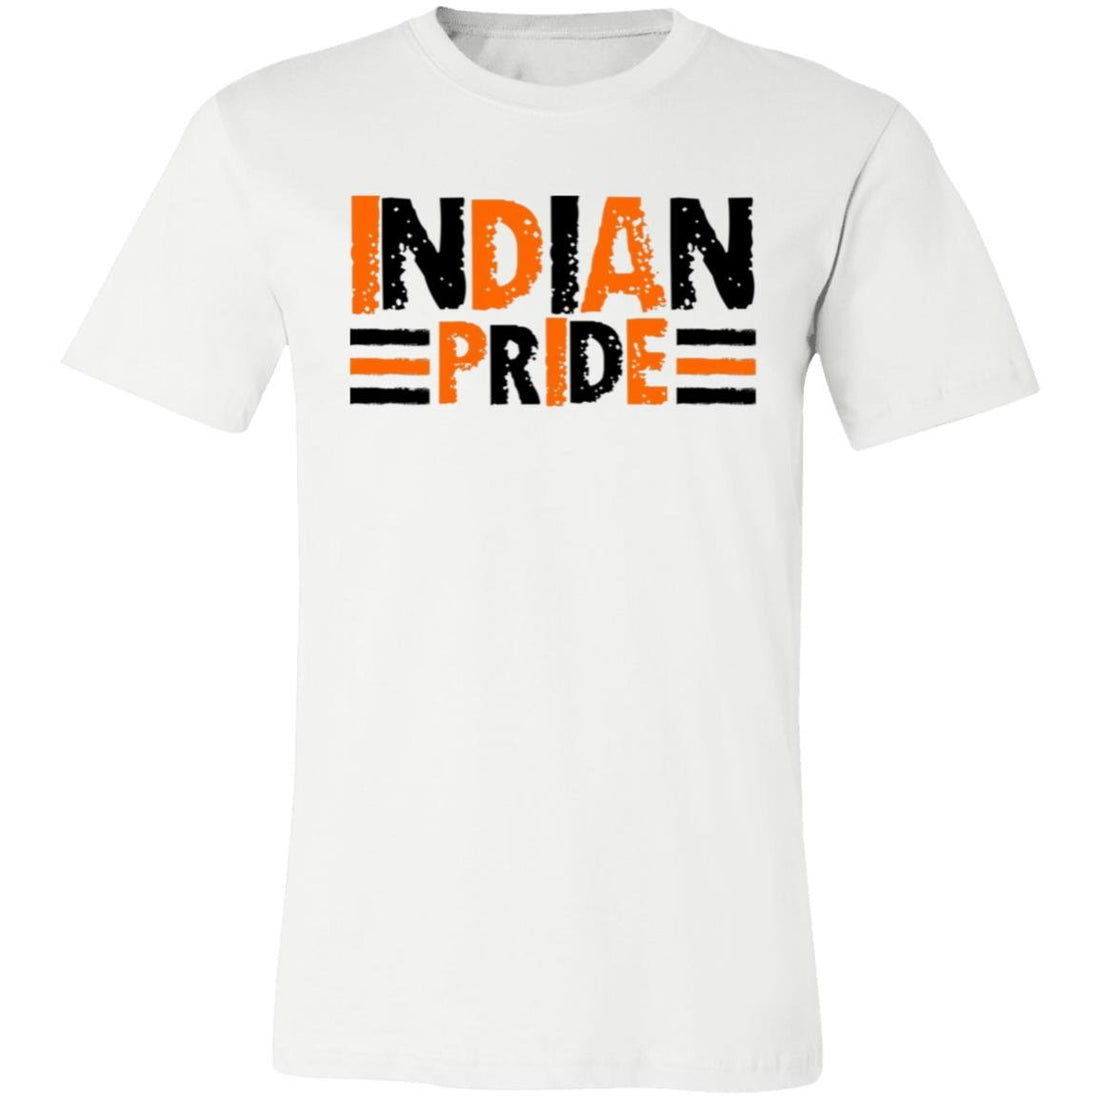 Indian Pride T-Shirt - T-Shirts - Positively Sassy - Indian Pride T-Shirt